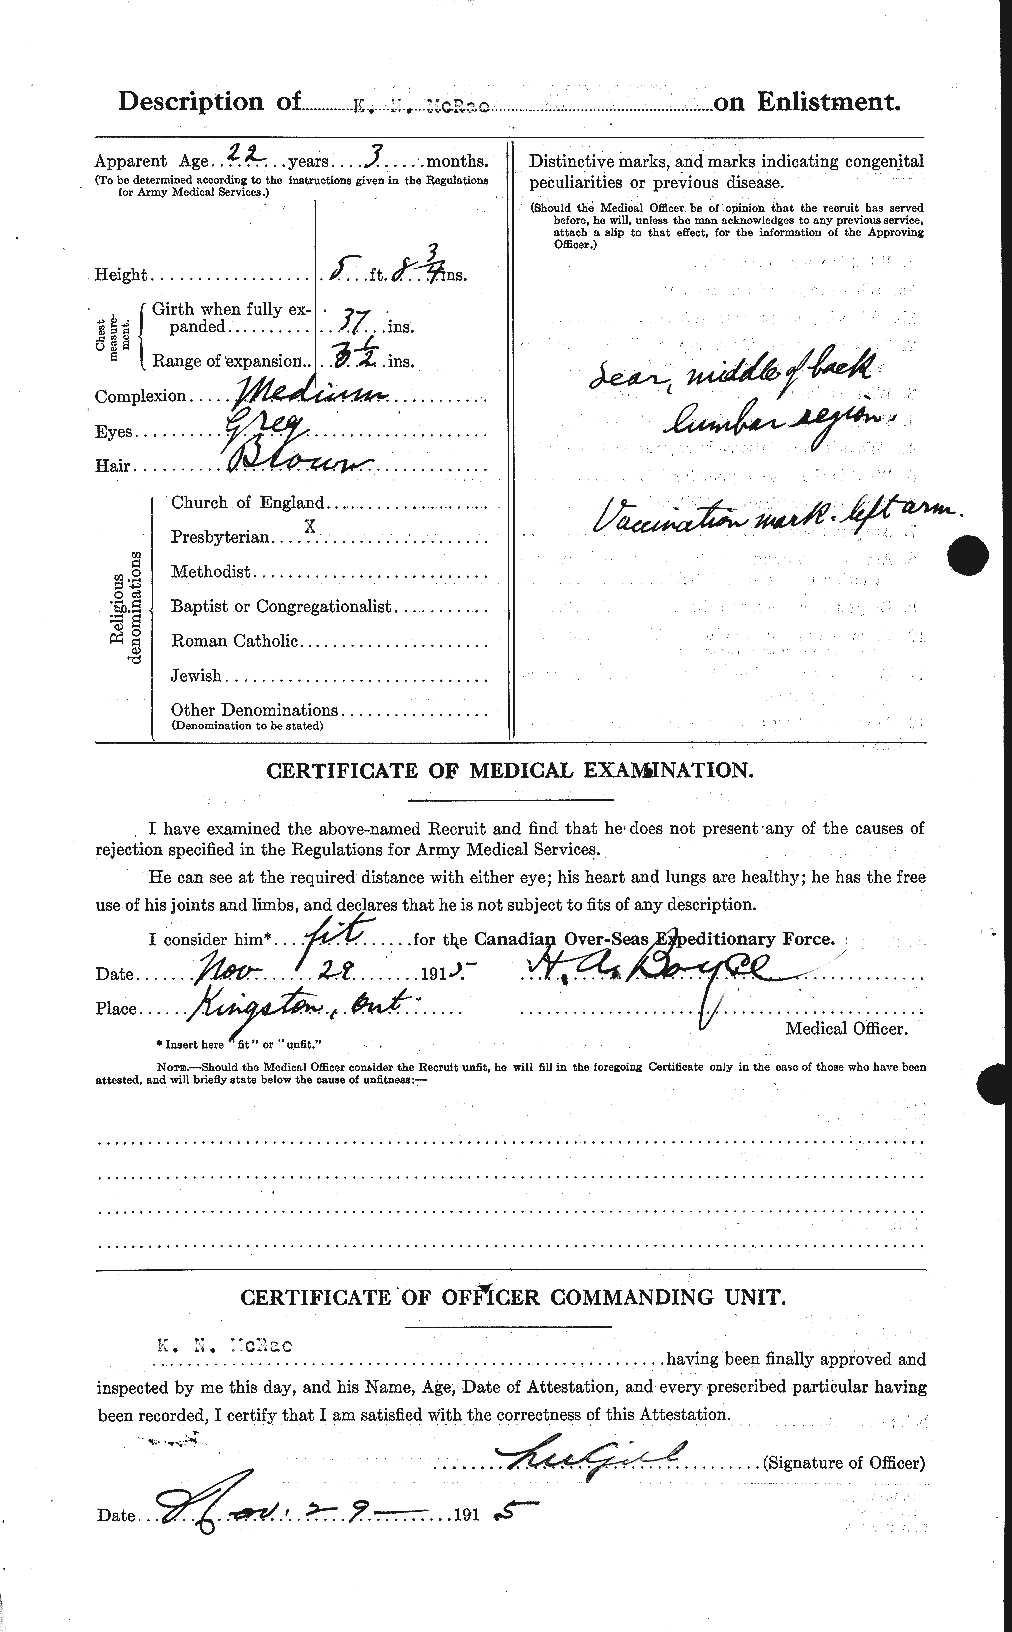 Personnel Records of the First World War - CEF 542863b